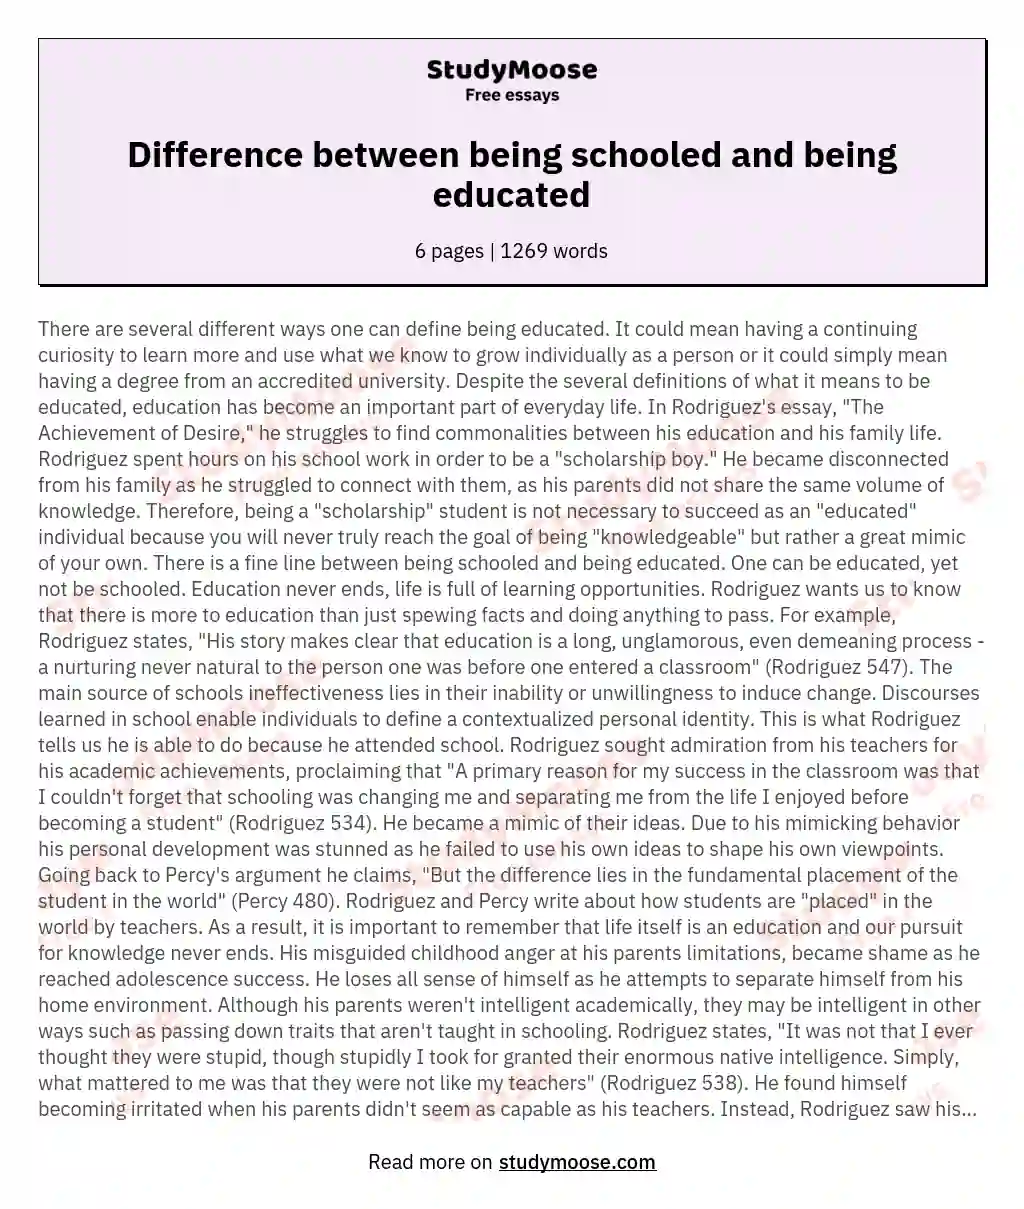 Difference between being schooled and being educated